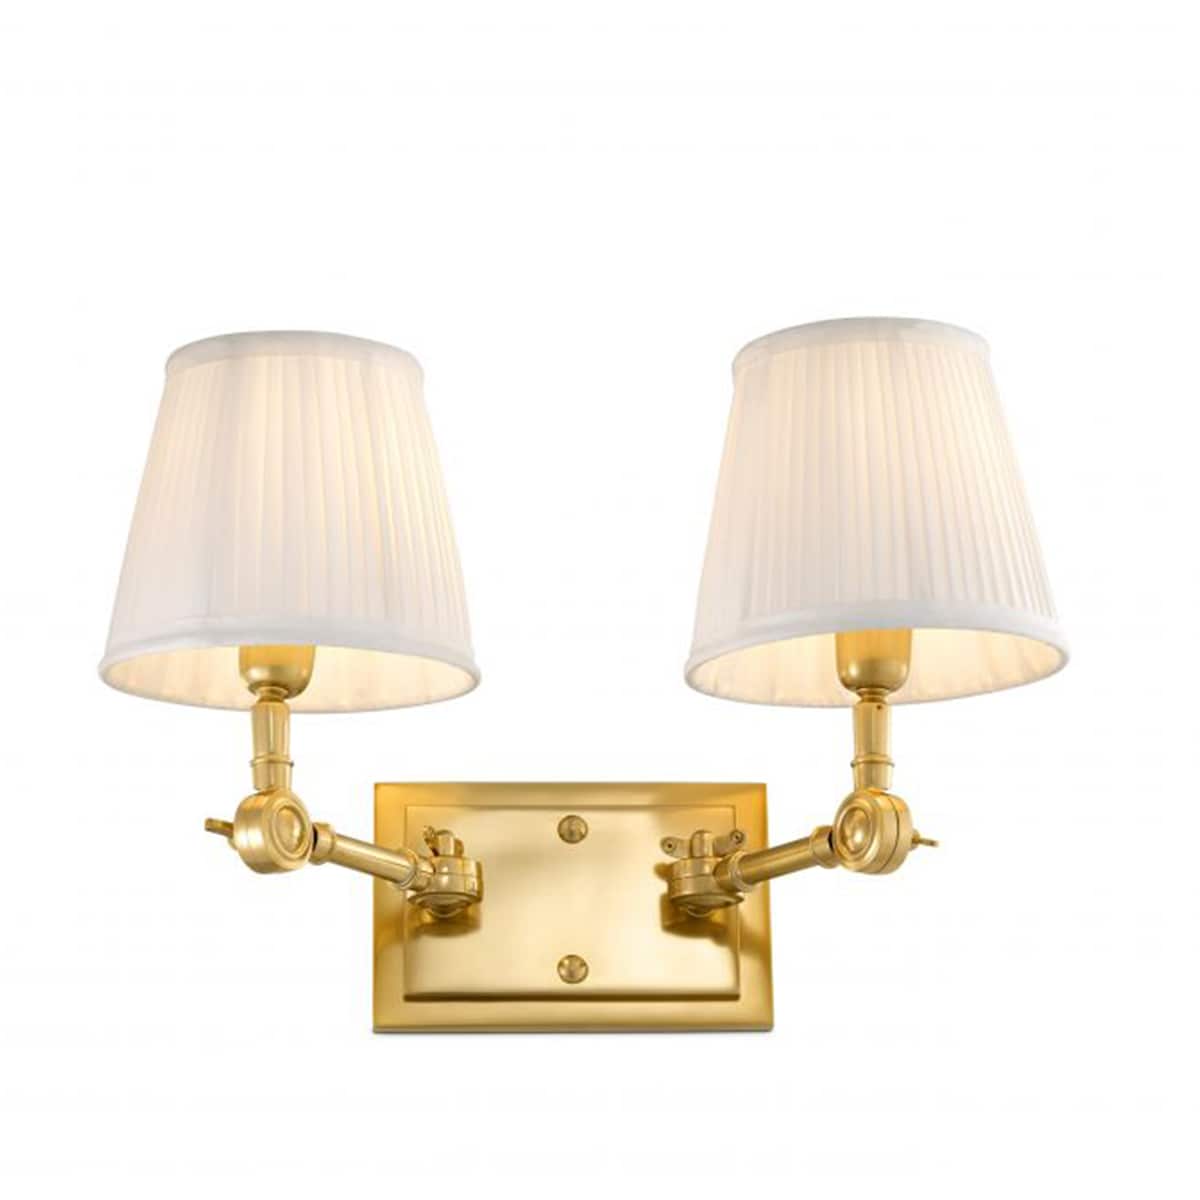 Wentworth Double - Wall lamp, Brass